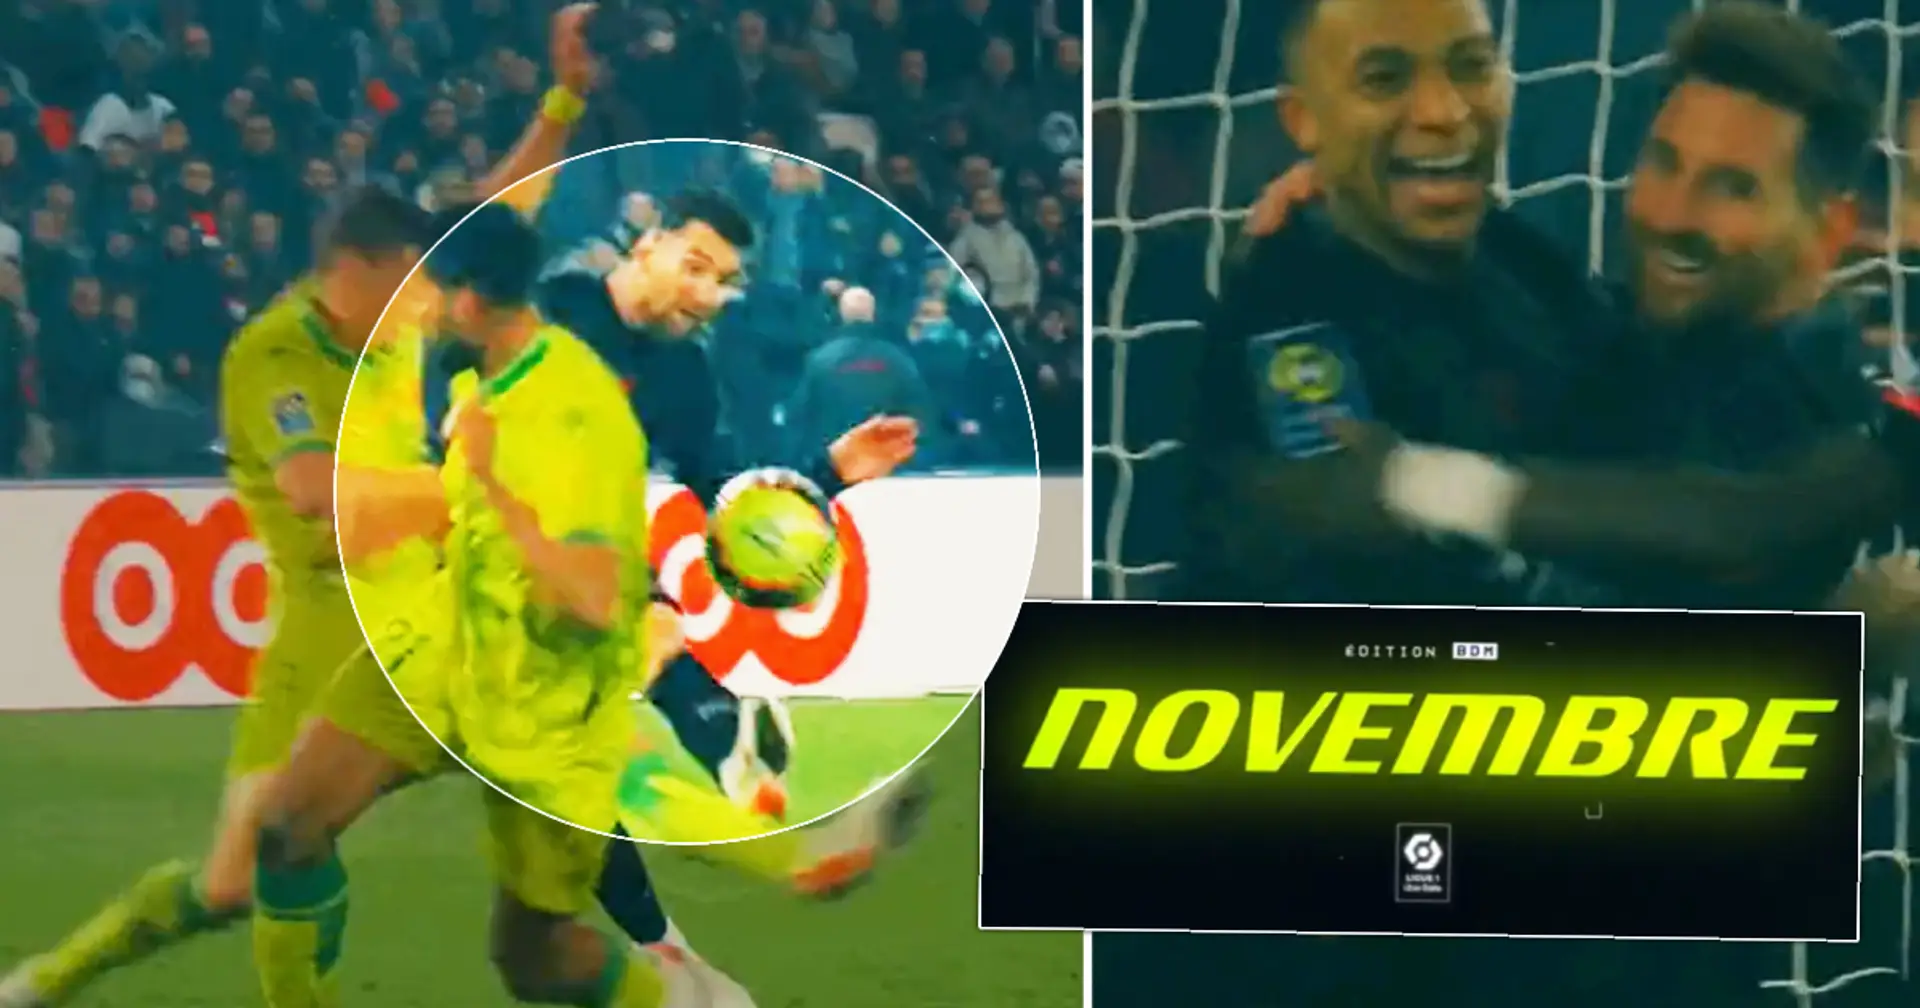 Leo Messi wins Goal of the Month award with his only goal in November